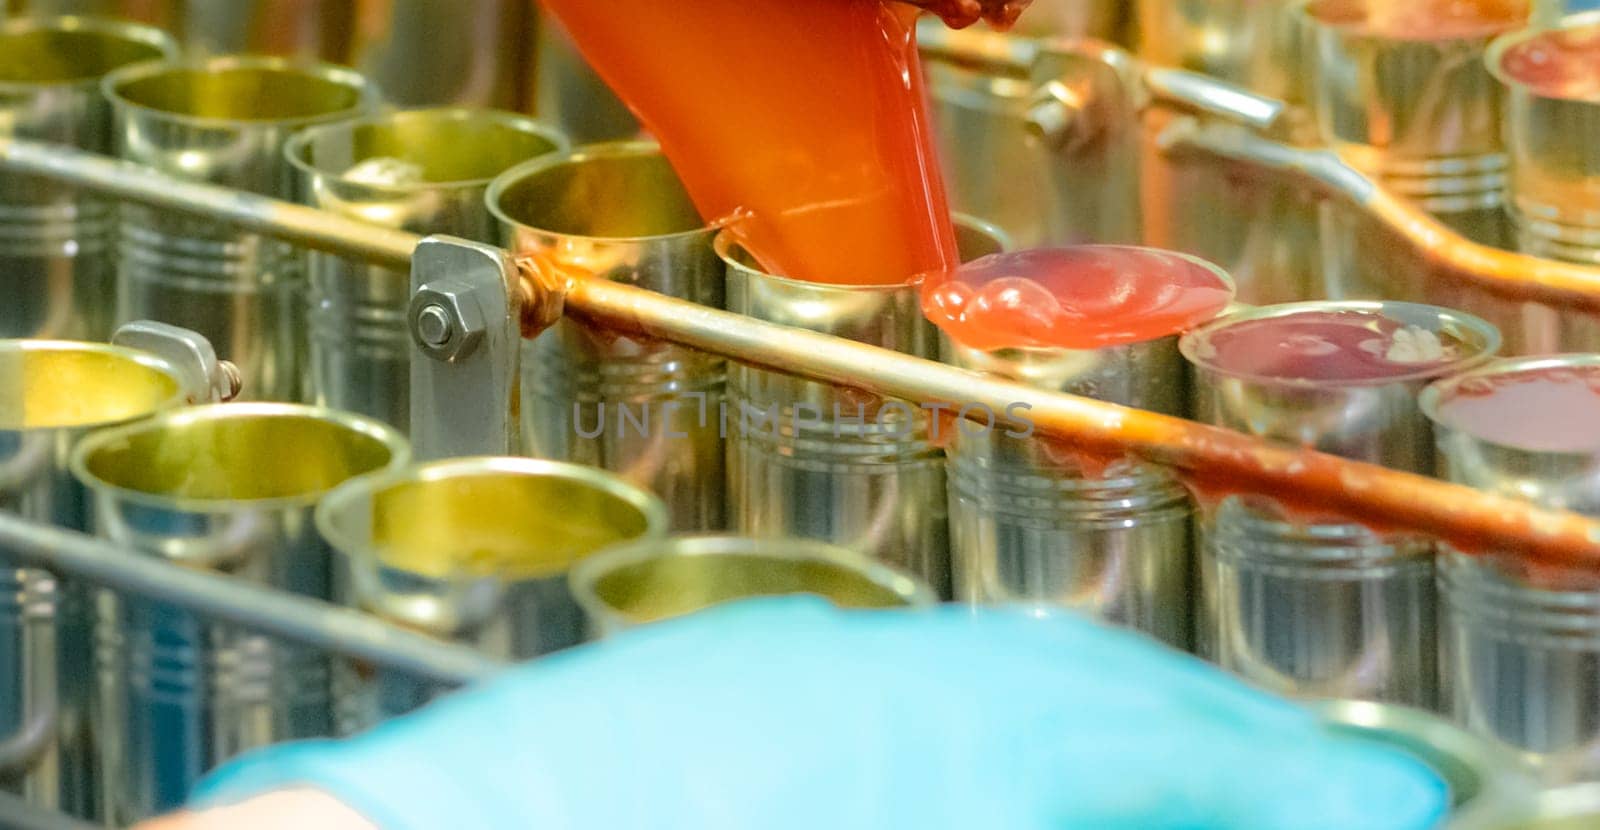 Canned fish factory. Food industry. Machine filling red tomato sauce into sardine can at food factory. Food processing production line. Food manufacturing industry. Cans of sardines on conveyor belt. by Fahroni